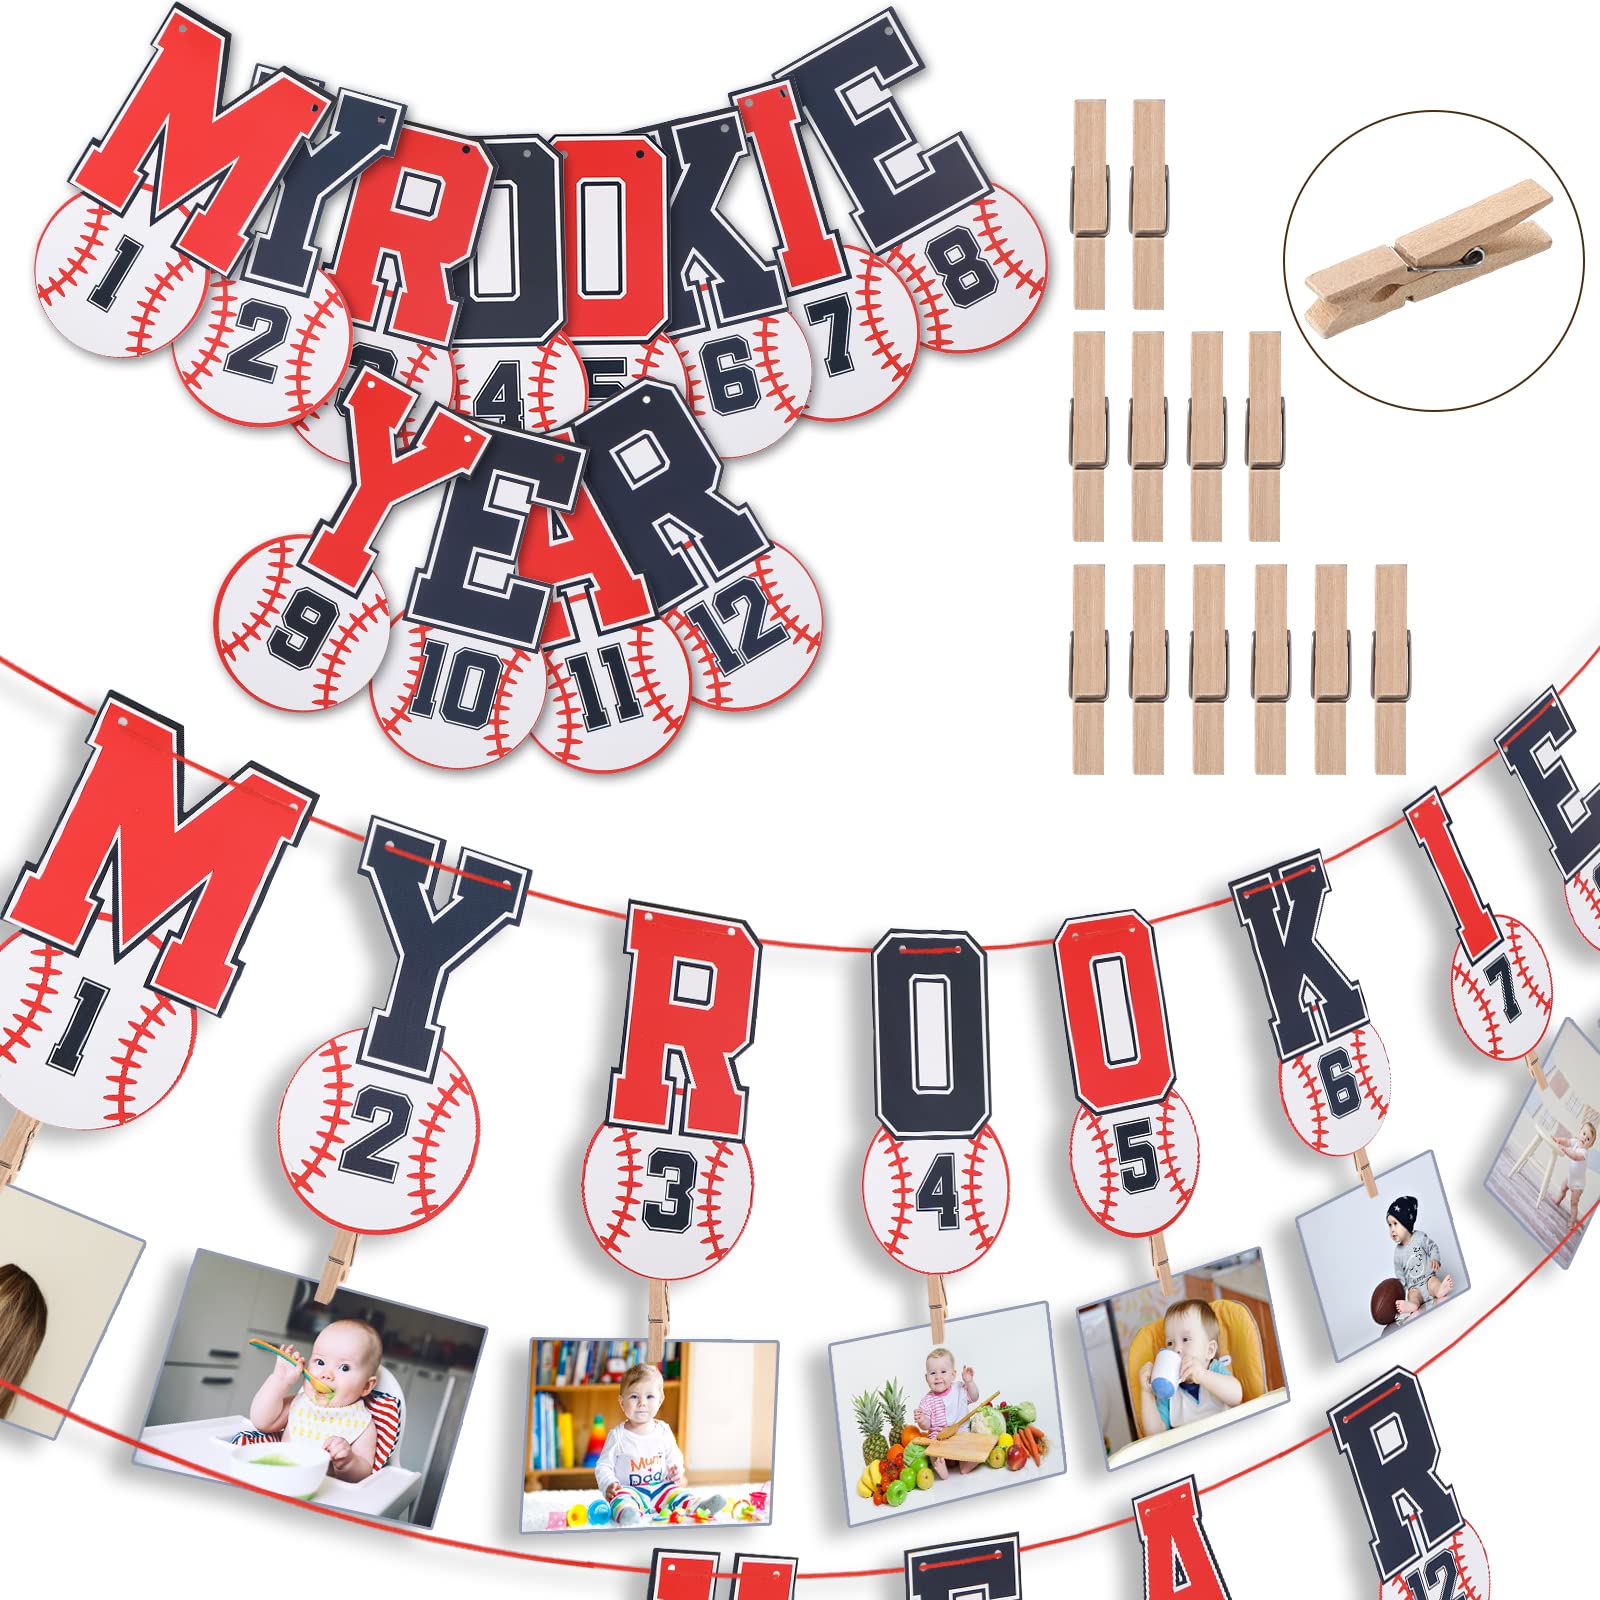 2 Pcs 1st Birthday Monthly Photo Banner Rookie of the Year 1st Birthday Banner Kid's 1st Year Picture Banner One Birthday High Chair Banner Sports Party Supplies Shower Decorations (Baseball)